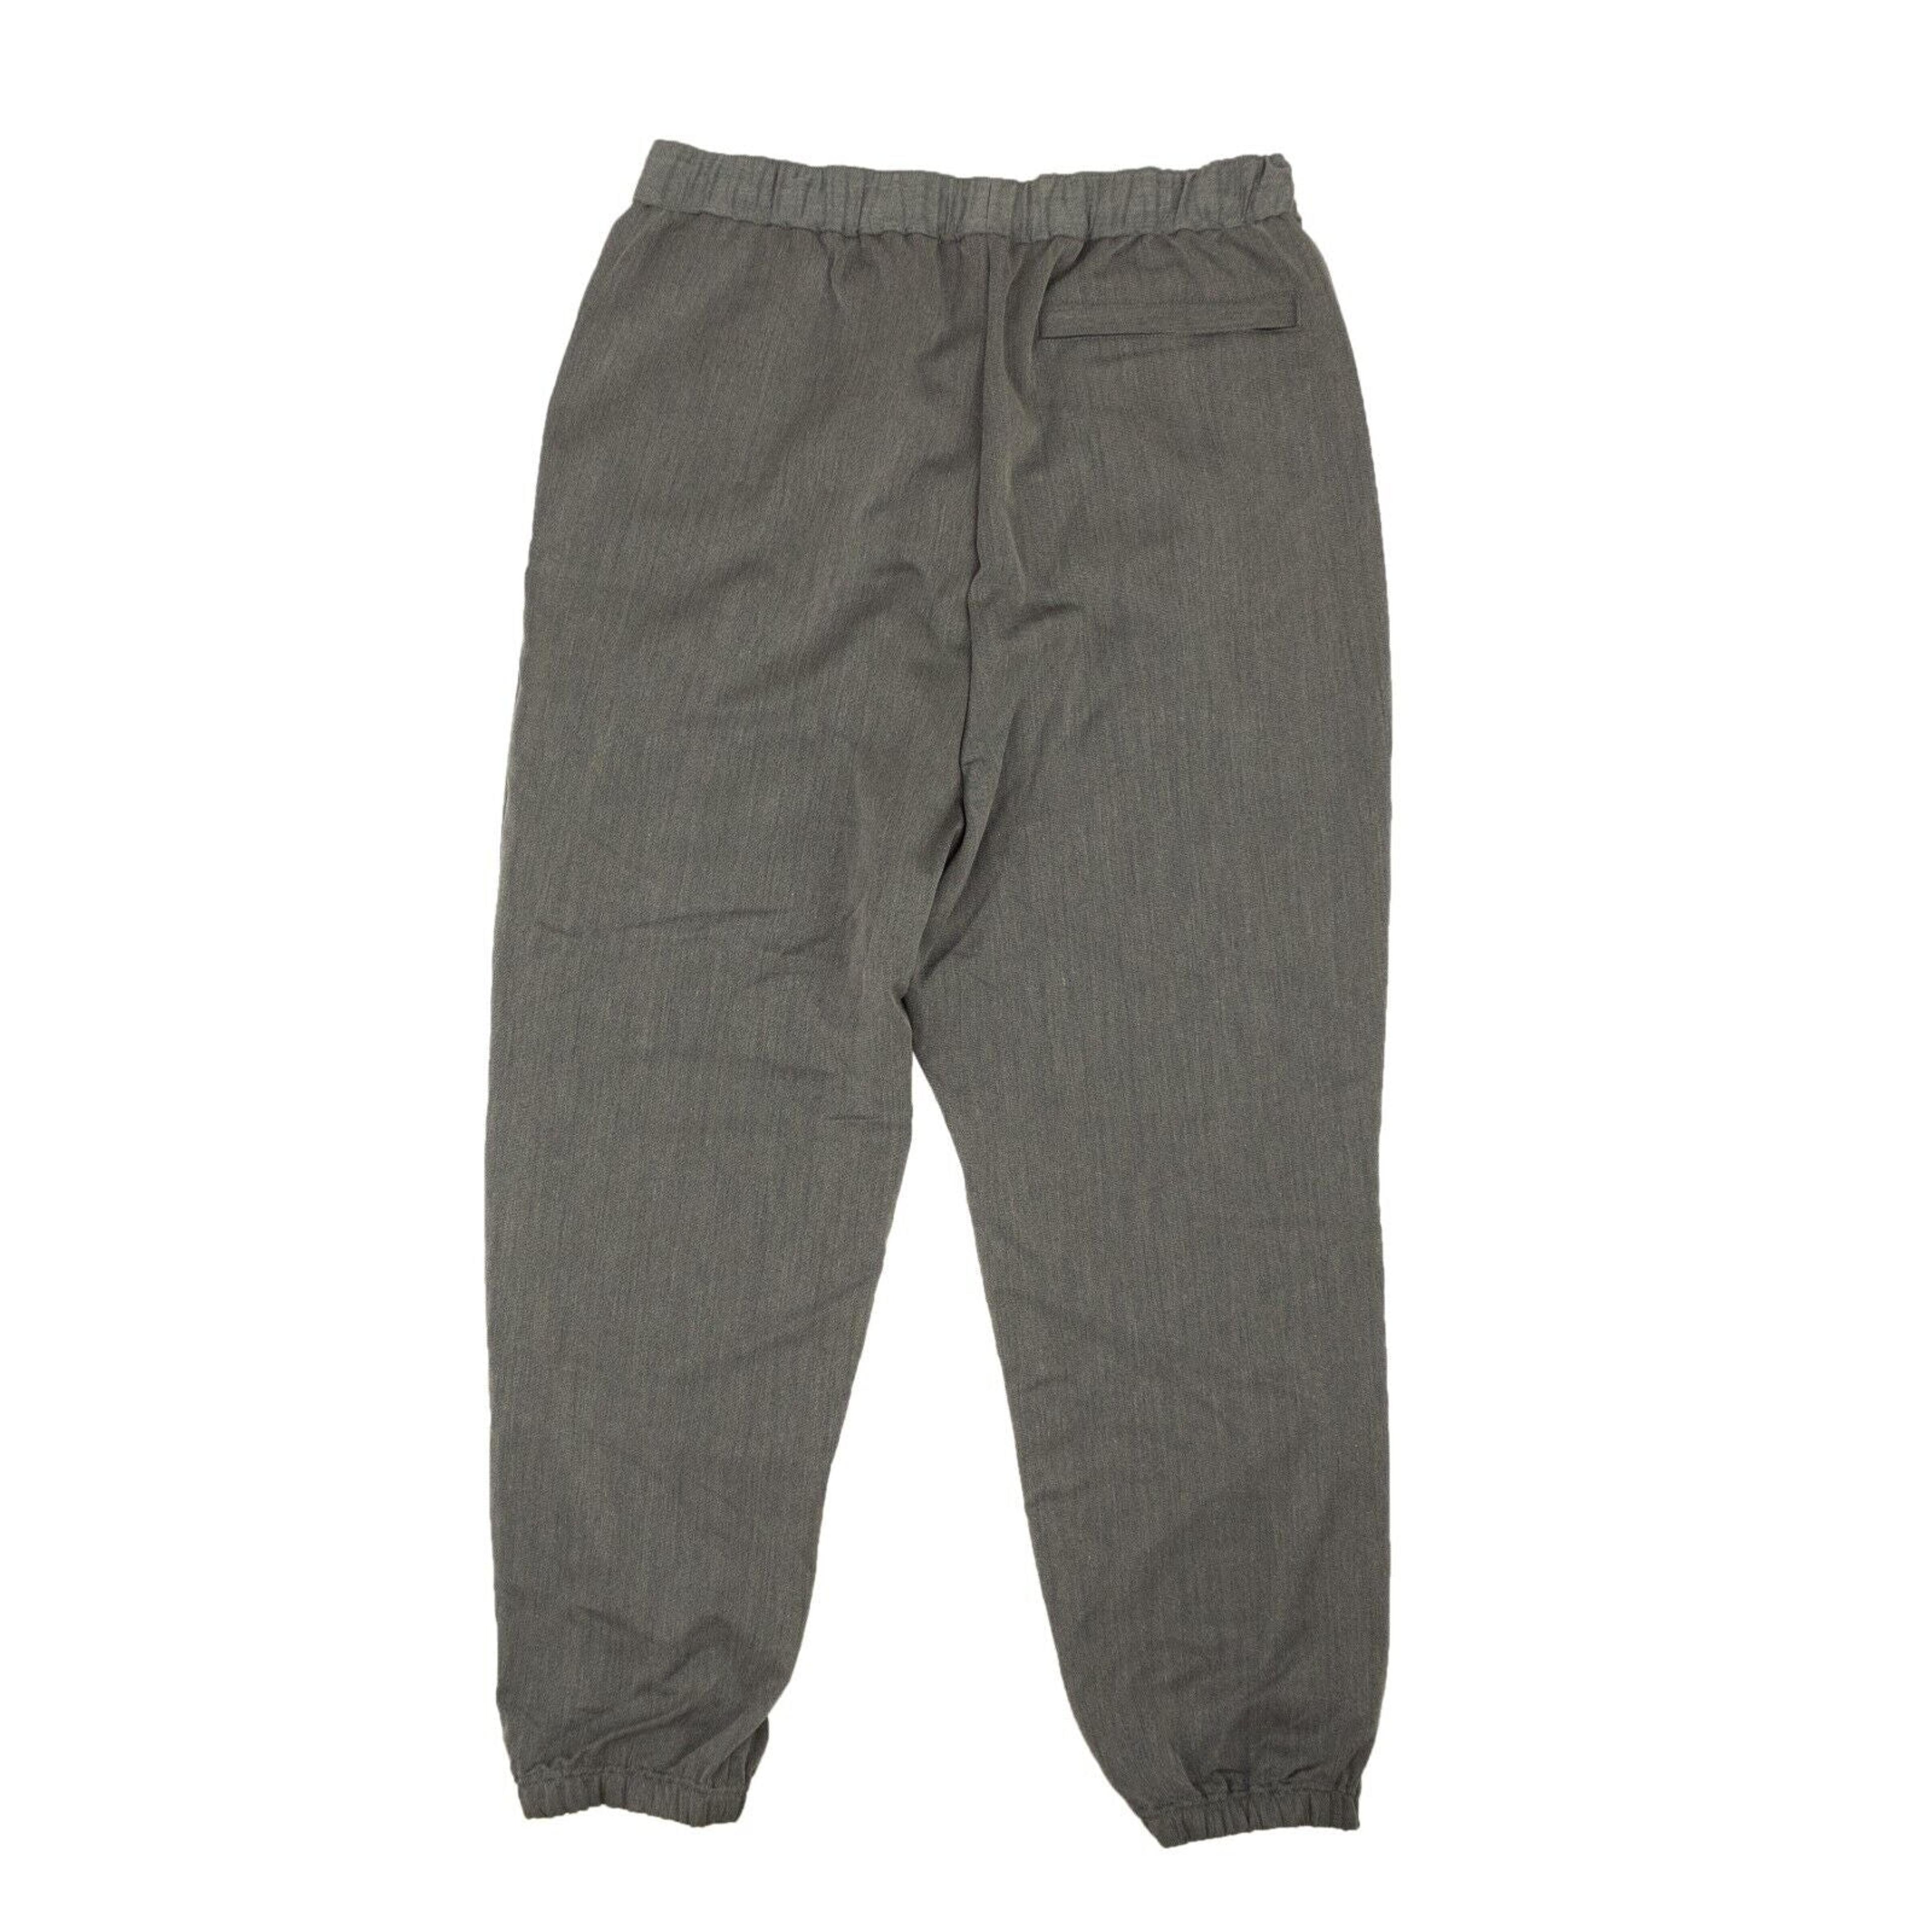 Alternate View 2 of Opening Ceremony Polyester Tailoring Jogger Pants - Gray